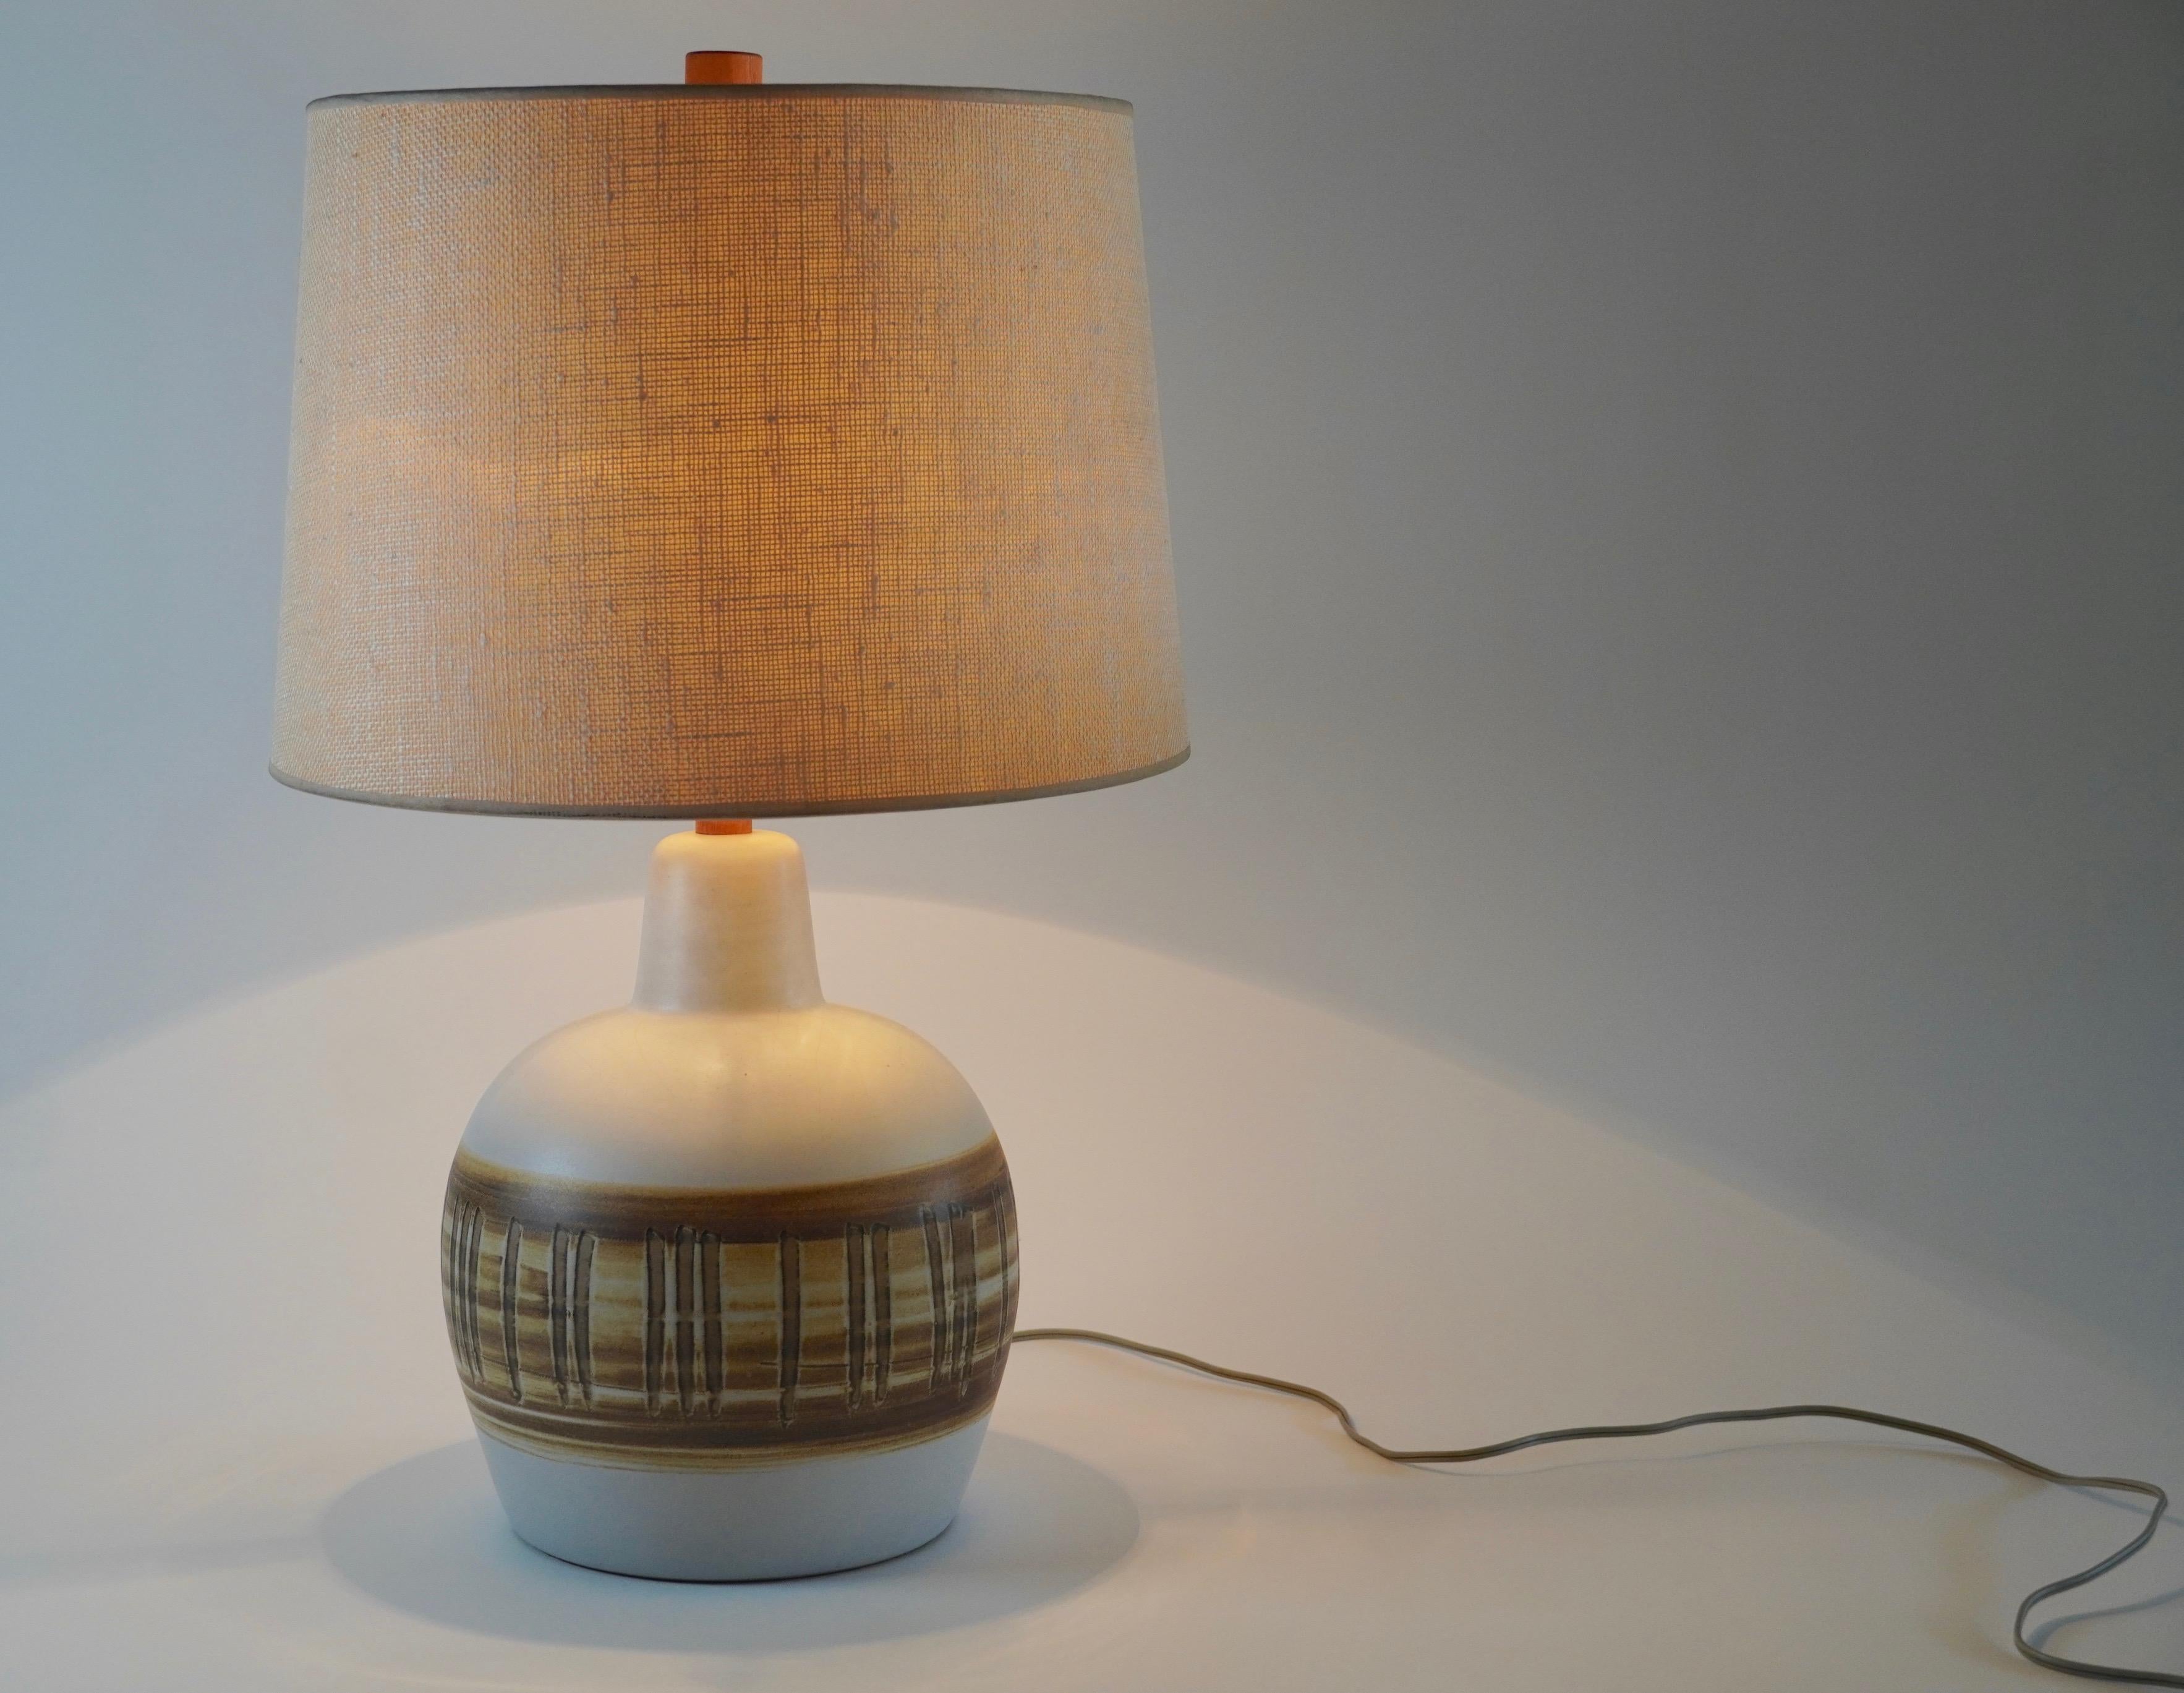 All original Martz ceramic table lamp with shade having beige and brown hand painted glazes with both vertical and horizontal design patterns across the center of the lamp resting on a walnut base designed by Jane & Gordon Martz and produced by